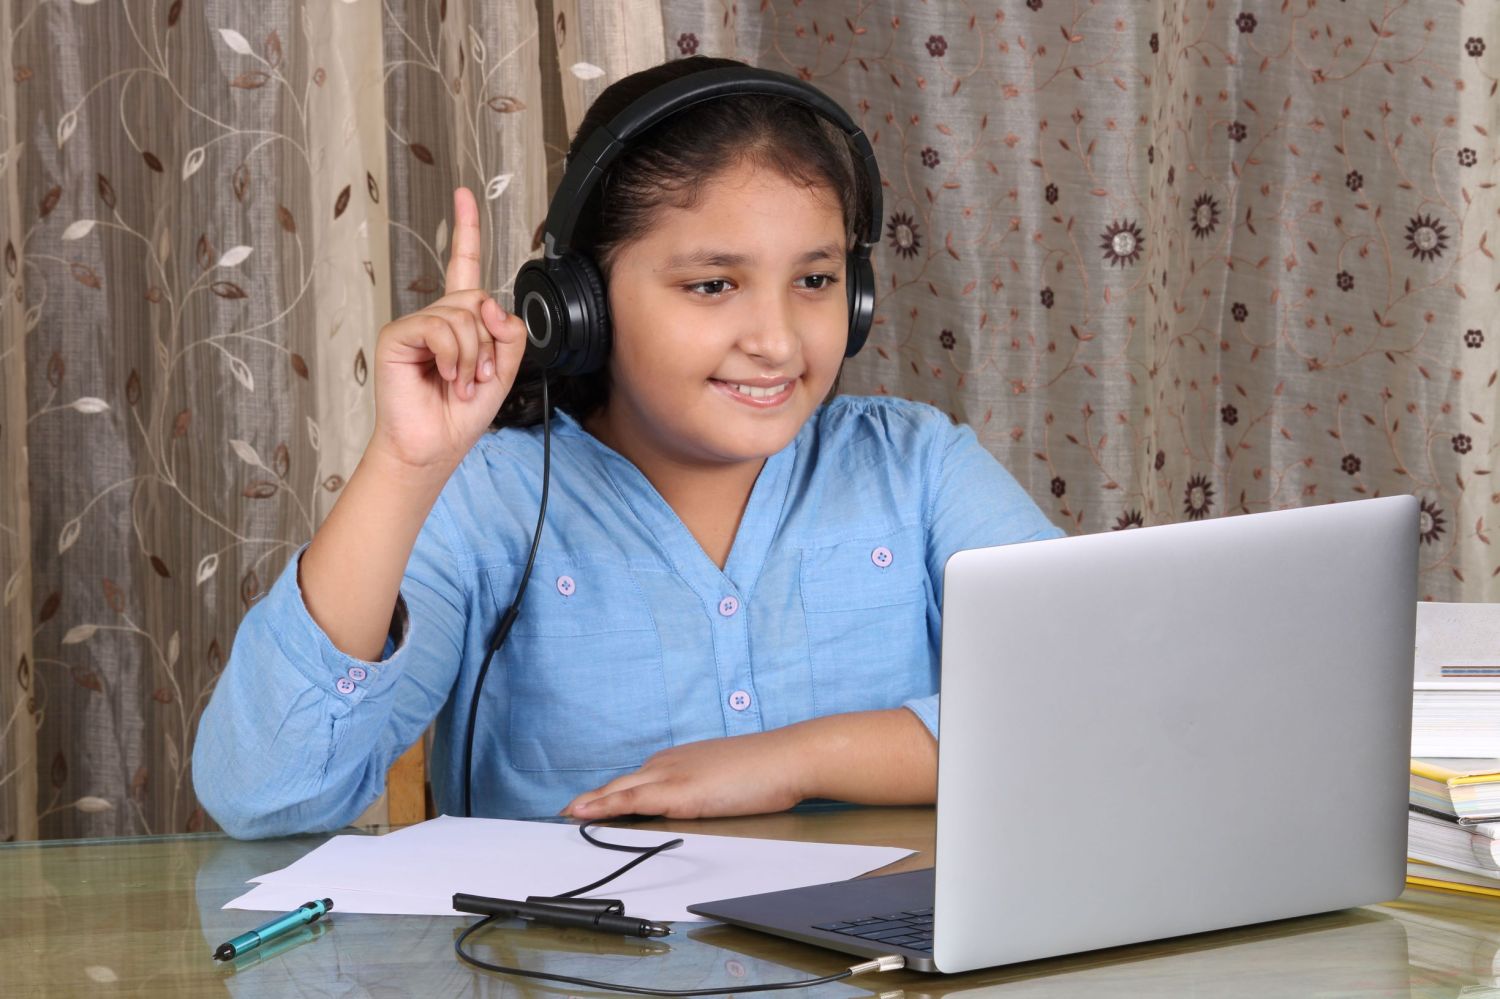 A girl in India uses a computer for onlline learning